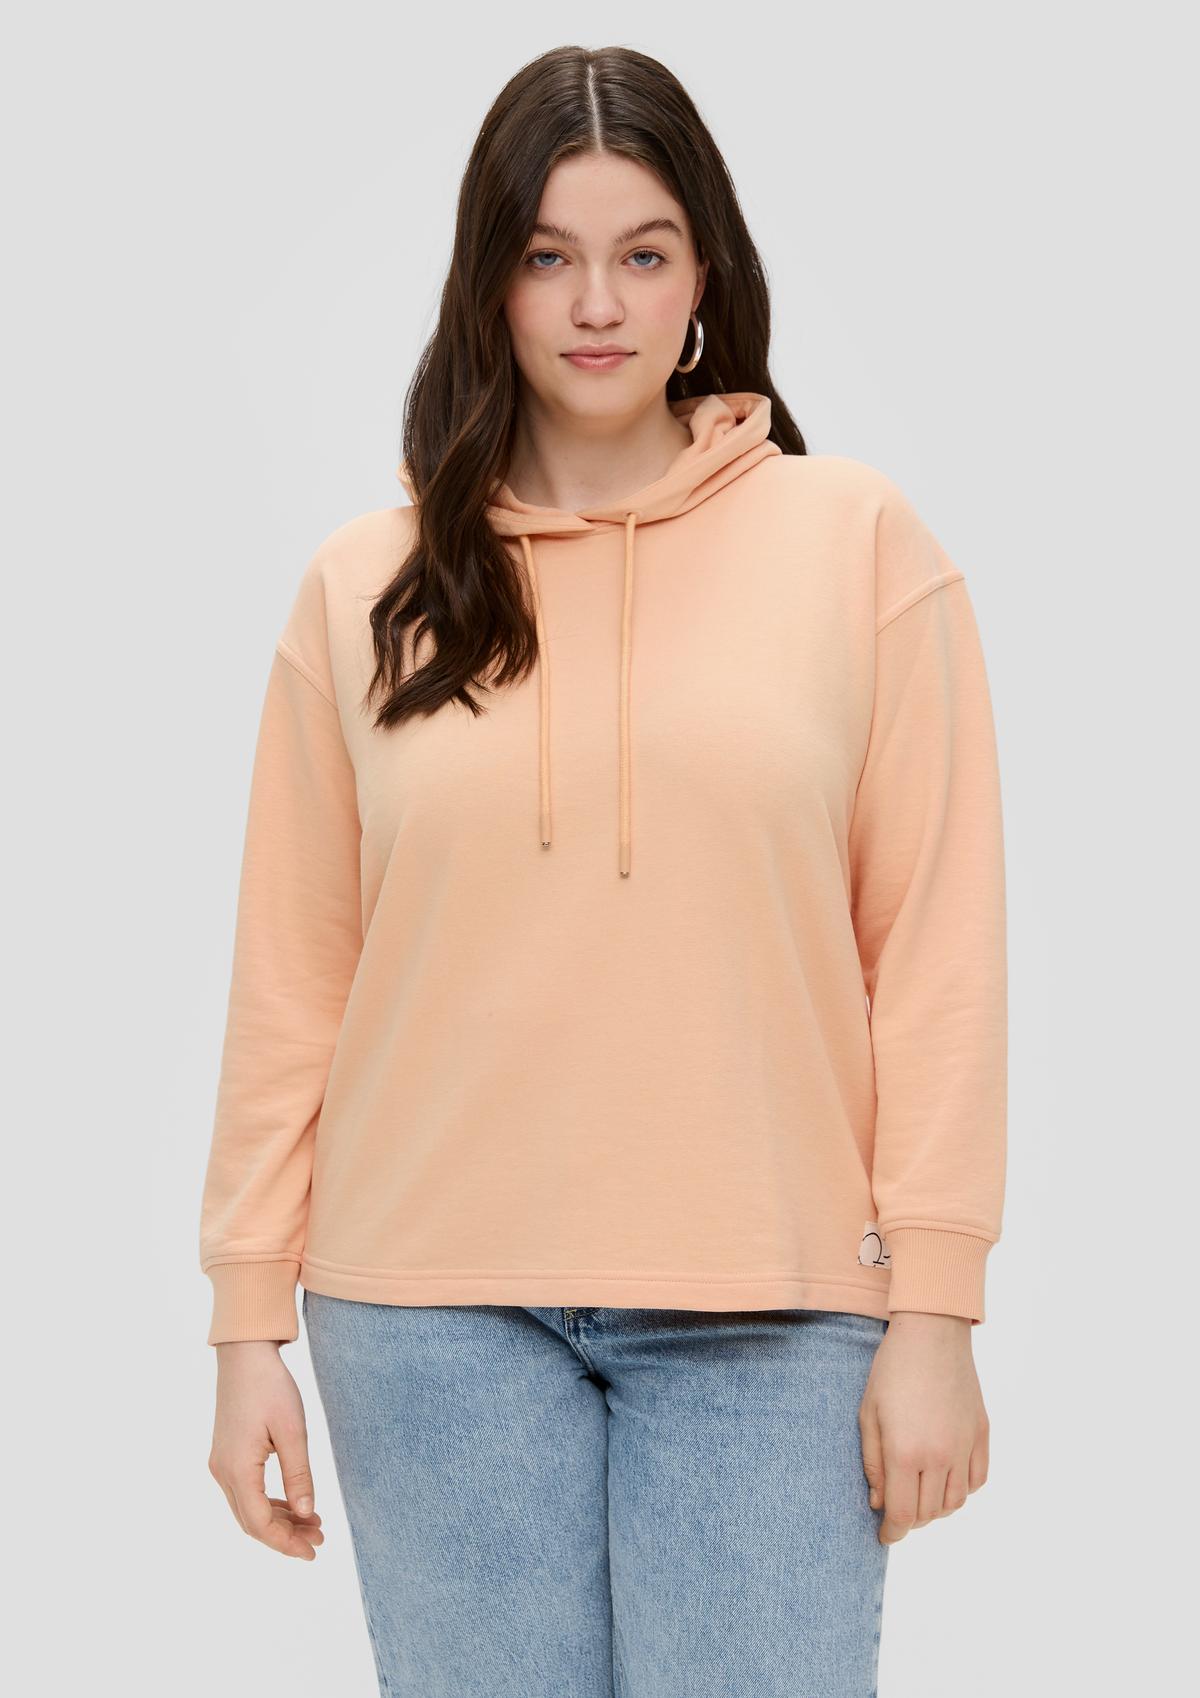 Hooded sweatshirt with dropped shoulders